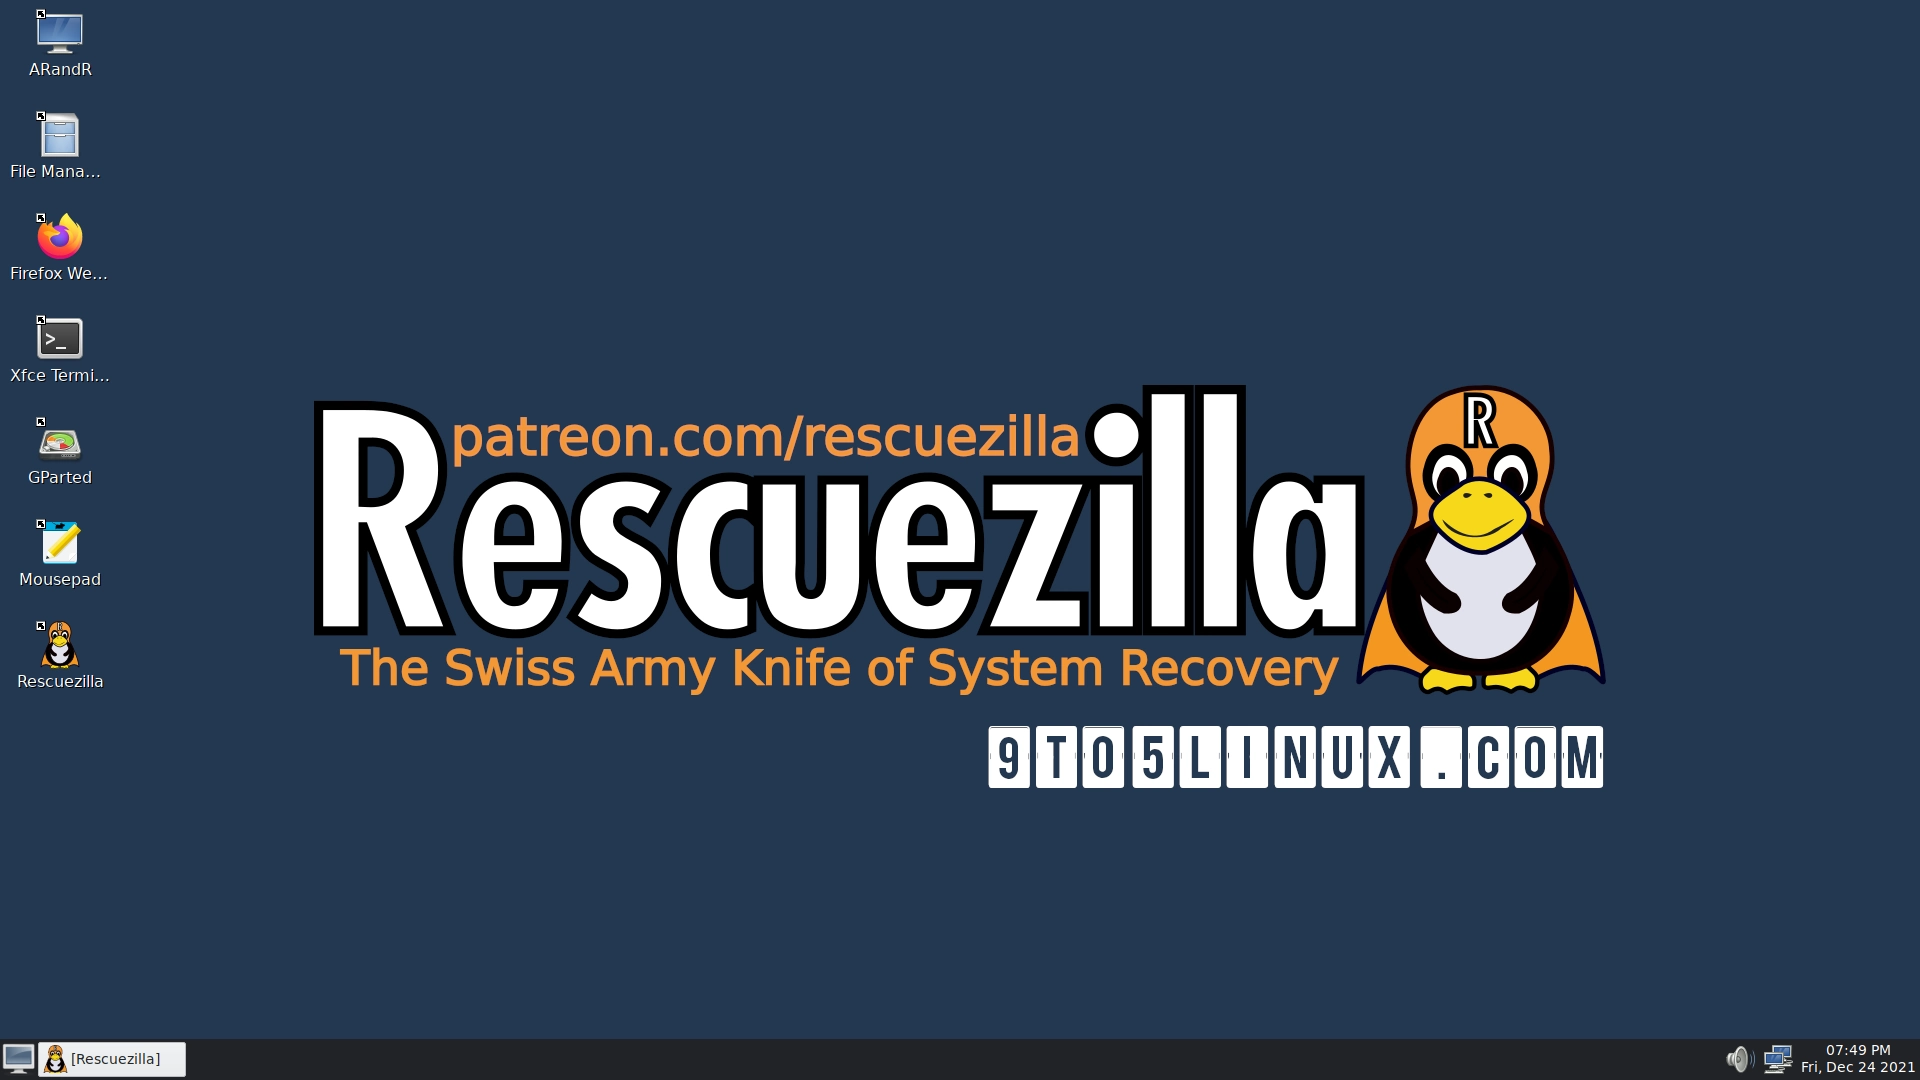 Rescuezilla 2.3 “Swiss Army Knife of System Recovery” Is Here, Based on Ubuntu 21.10